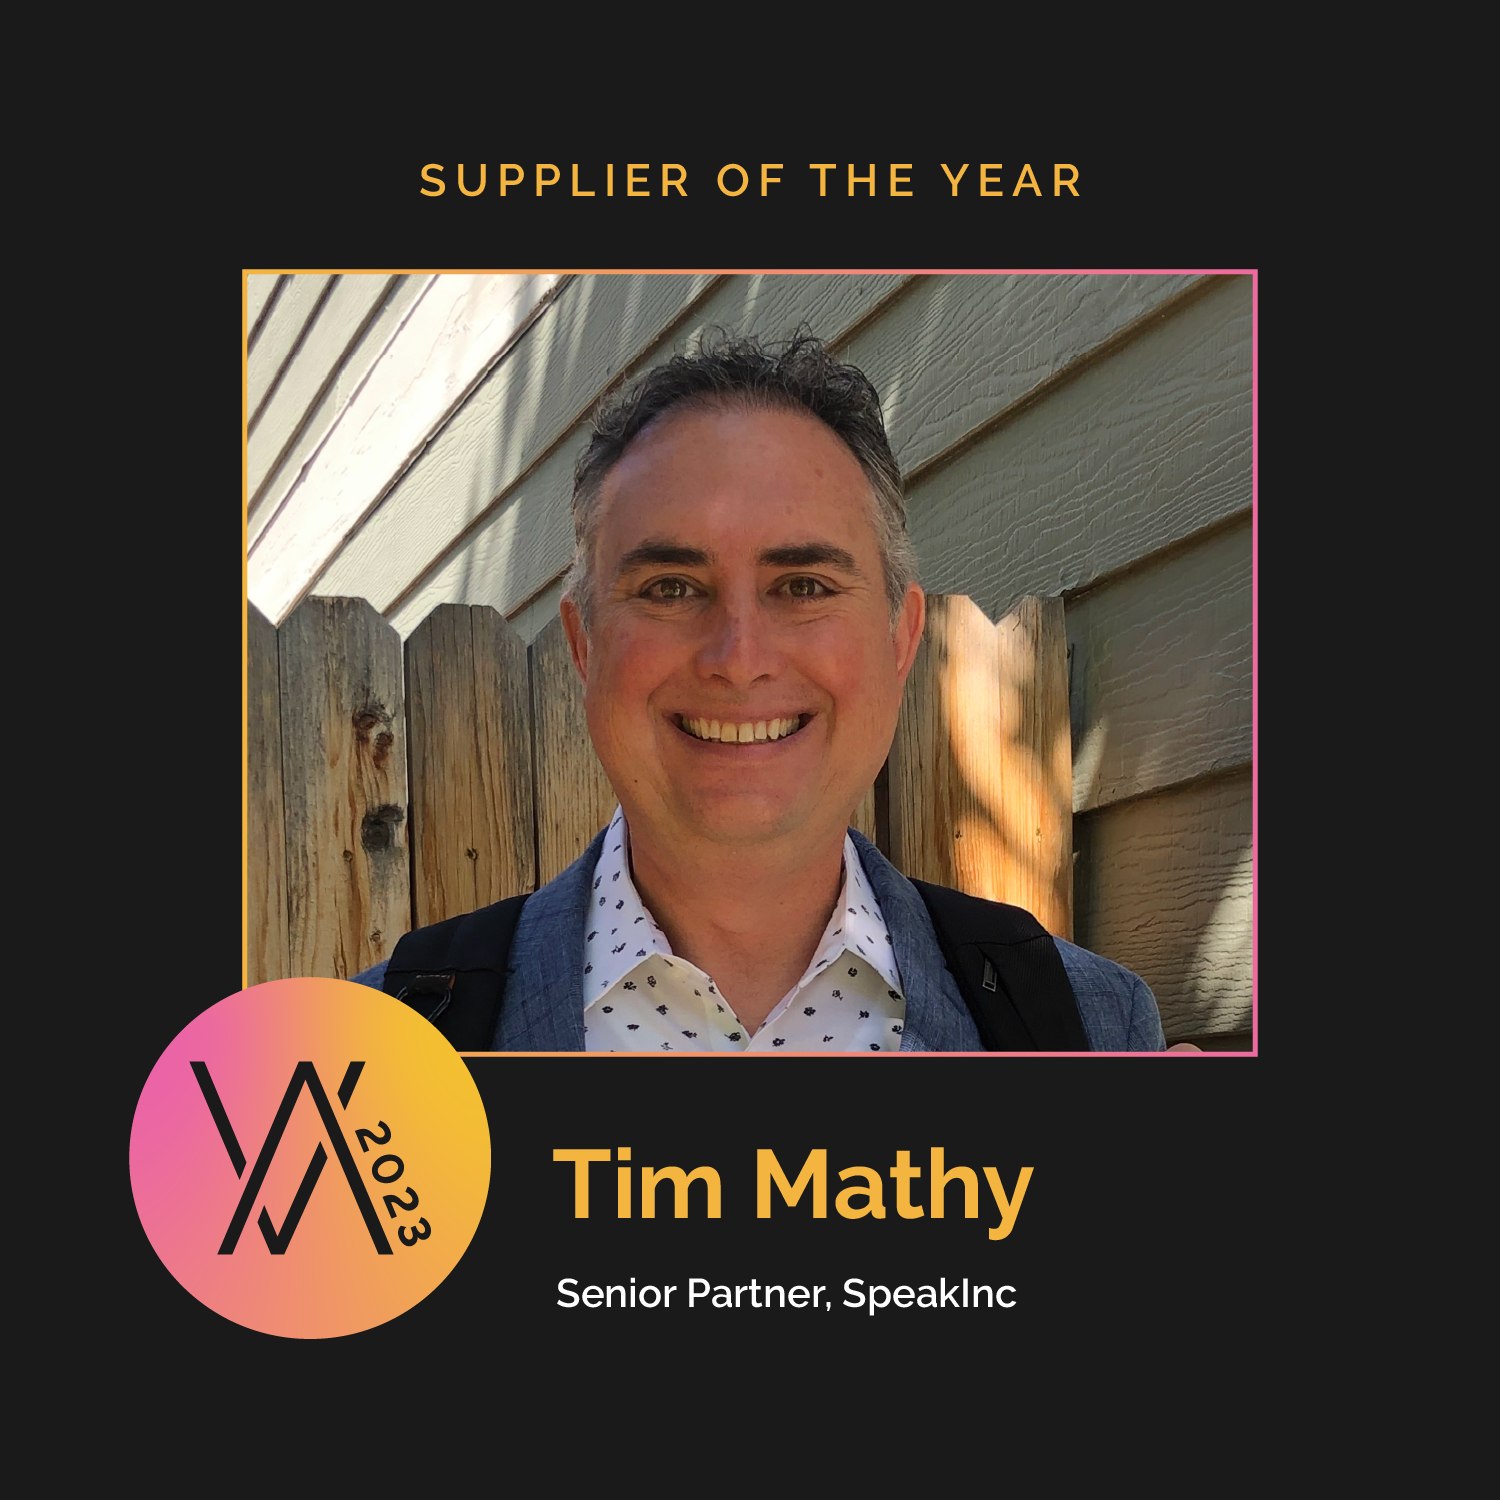 Congratulations Tim! PCMA Supplier of the Year!